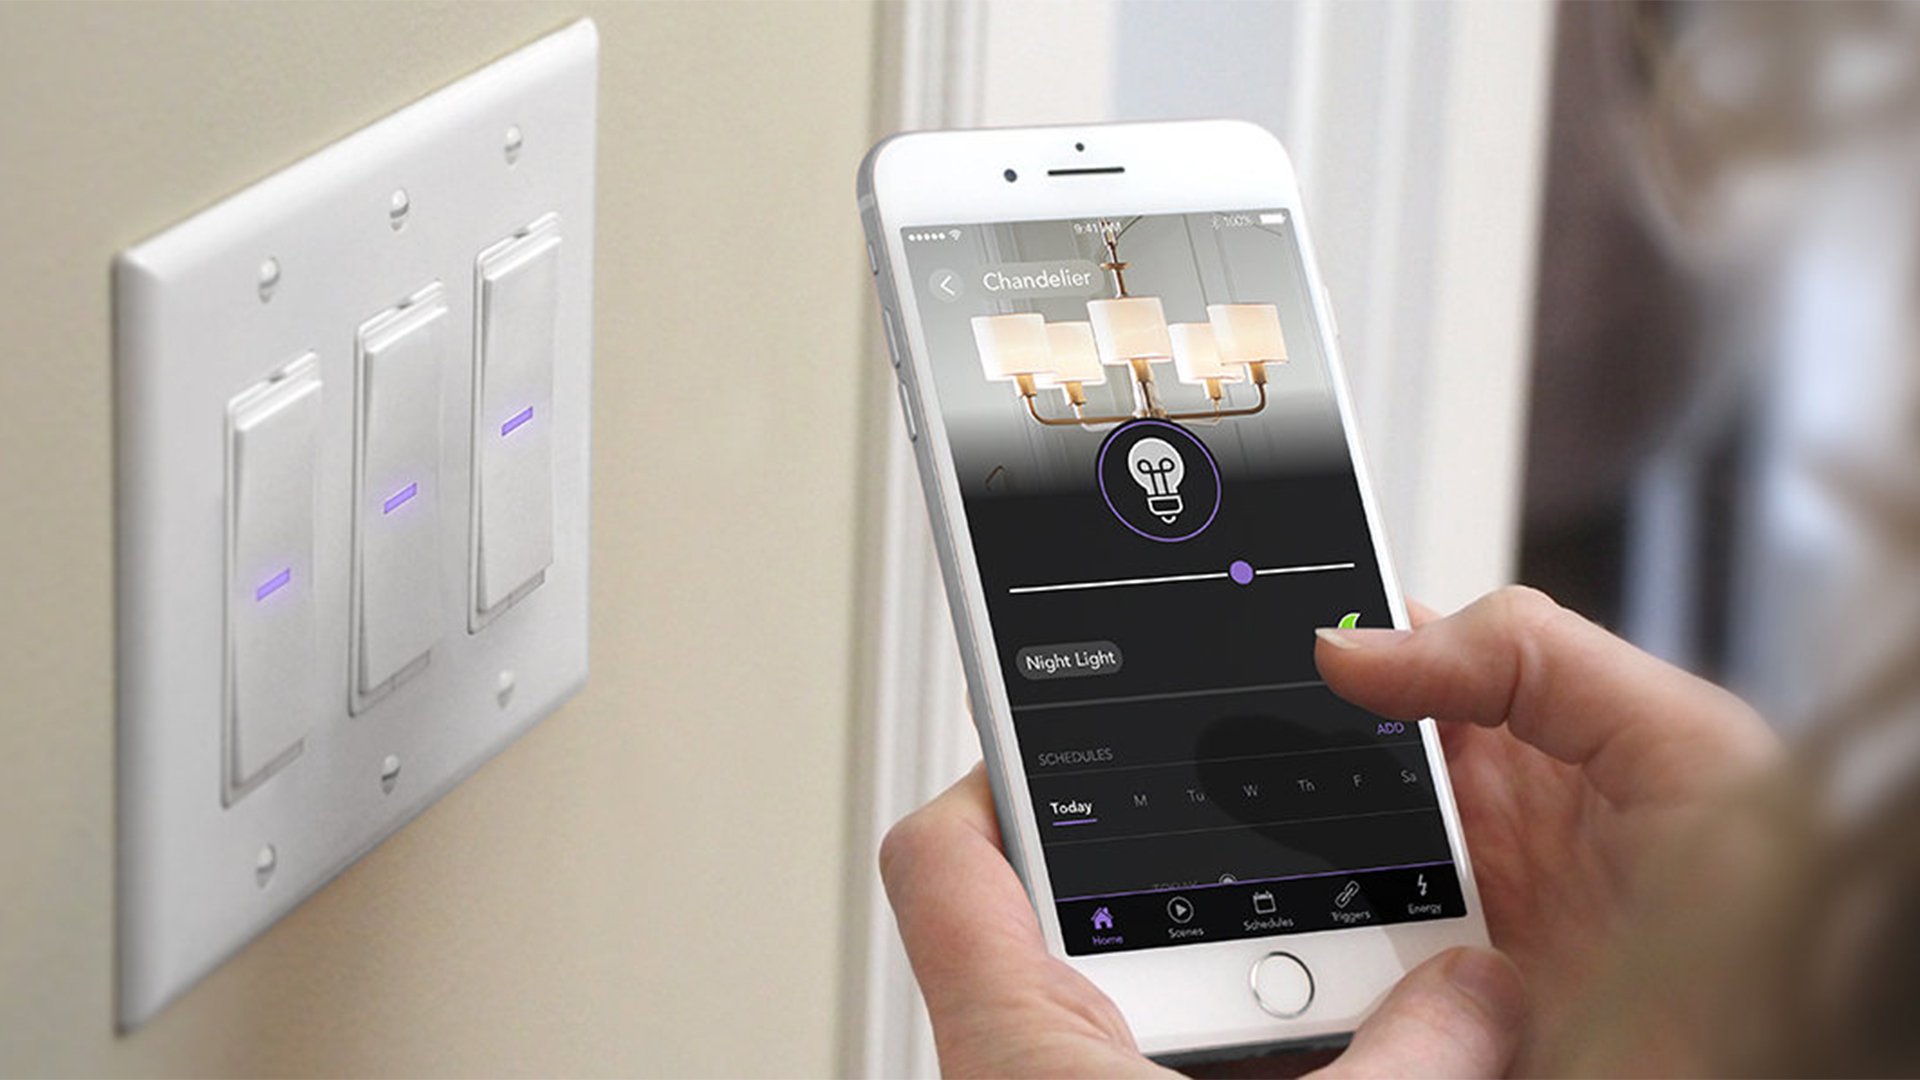 iDevices smart home automation products now available directly from Hubbell sales partners